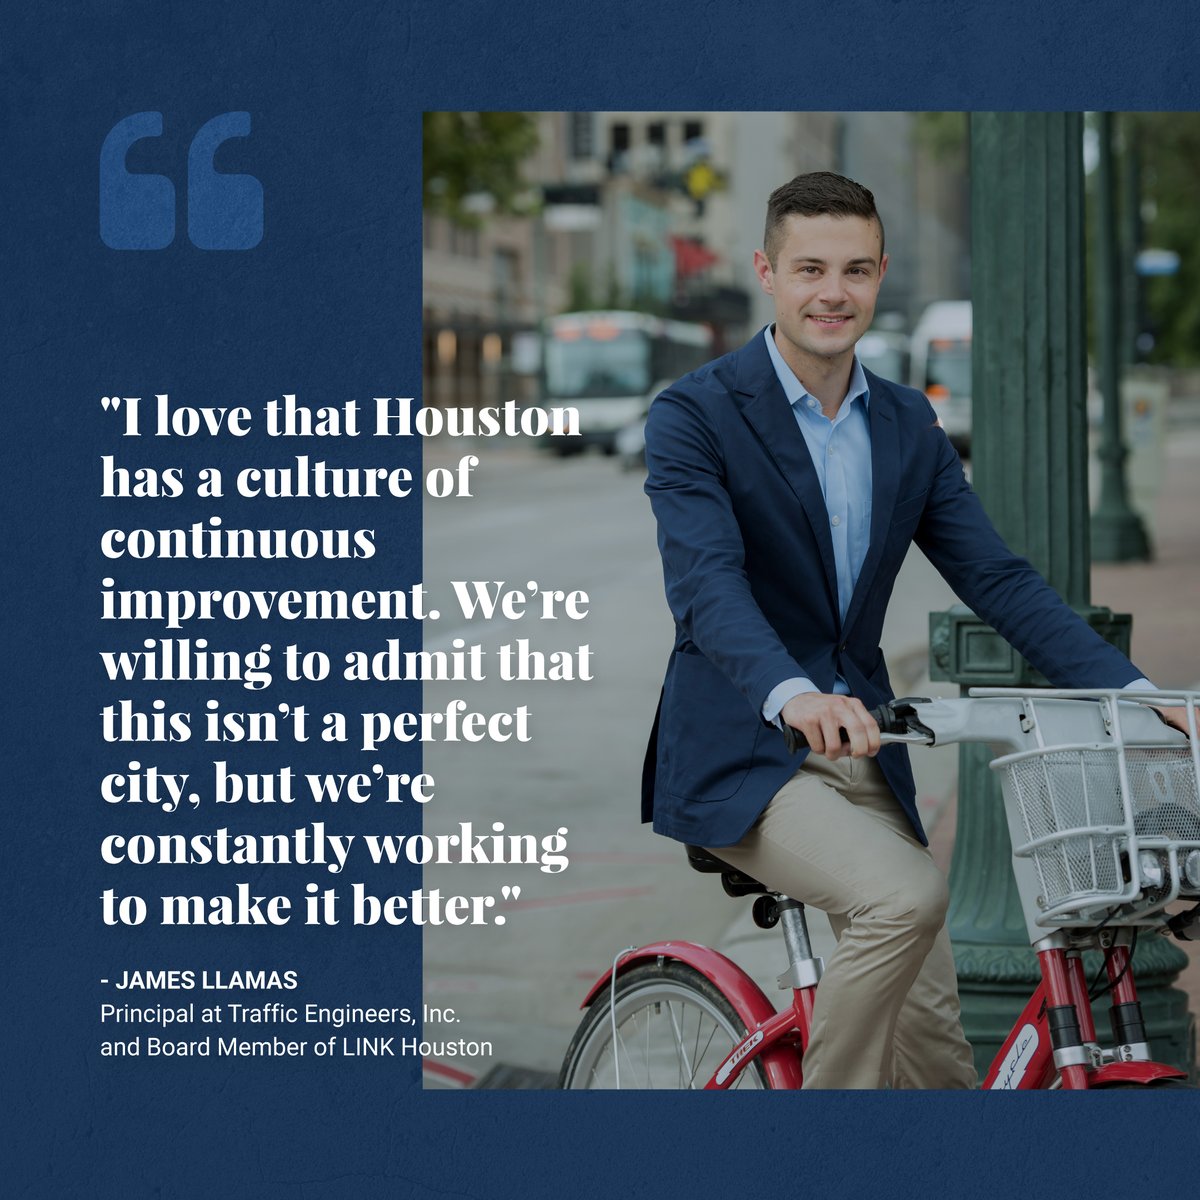 In his work with @TEI_PlanDesign, @LINK_Houston, @HoustonBCycle and @midtownHOU, @JamesLLlamas is working to make transportation and infrastructure in Houston safer, more accessible and more equitable for all. 

#HispanicHeritageMonth